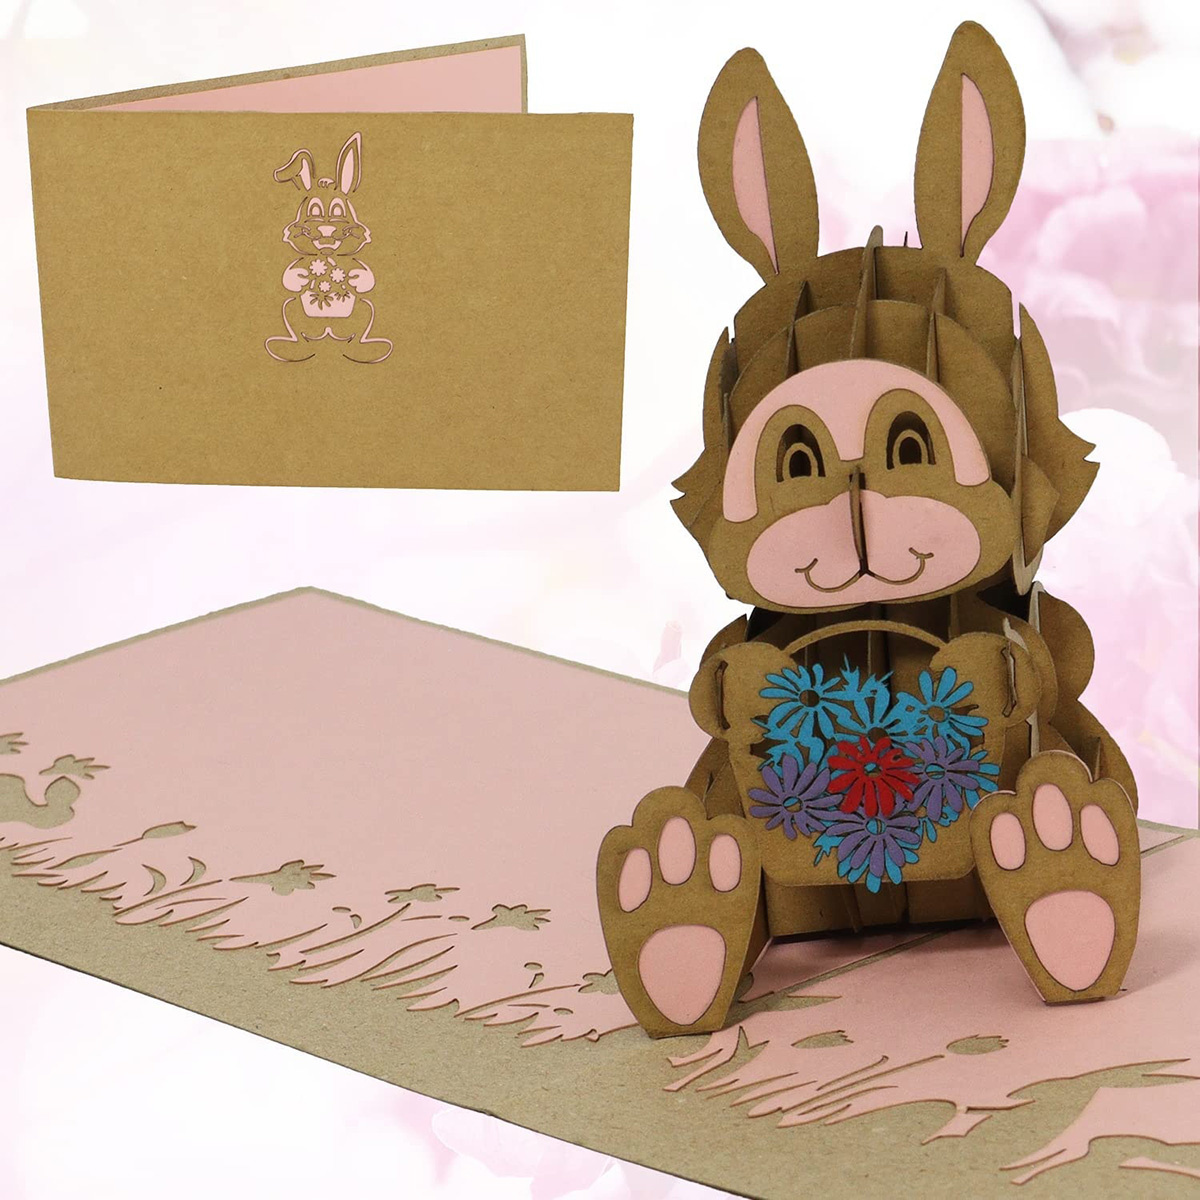 LINPOPUP POP UP cards, animals, birthday card, birthday, 3D greeting cards, pop up card birthday card, good luck, get well soon, Easter, bunny, LIN 17589, LINPopUp®. N345